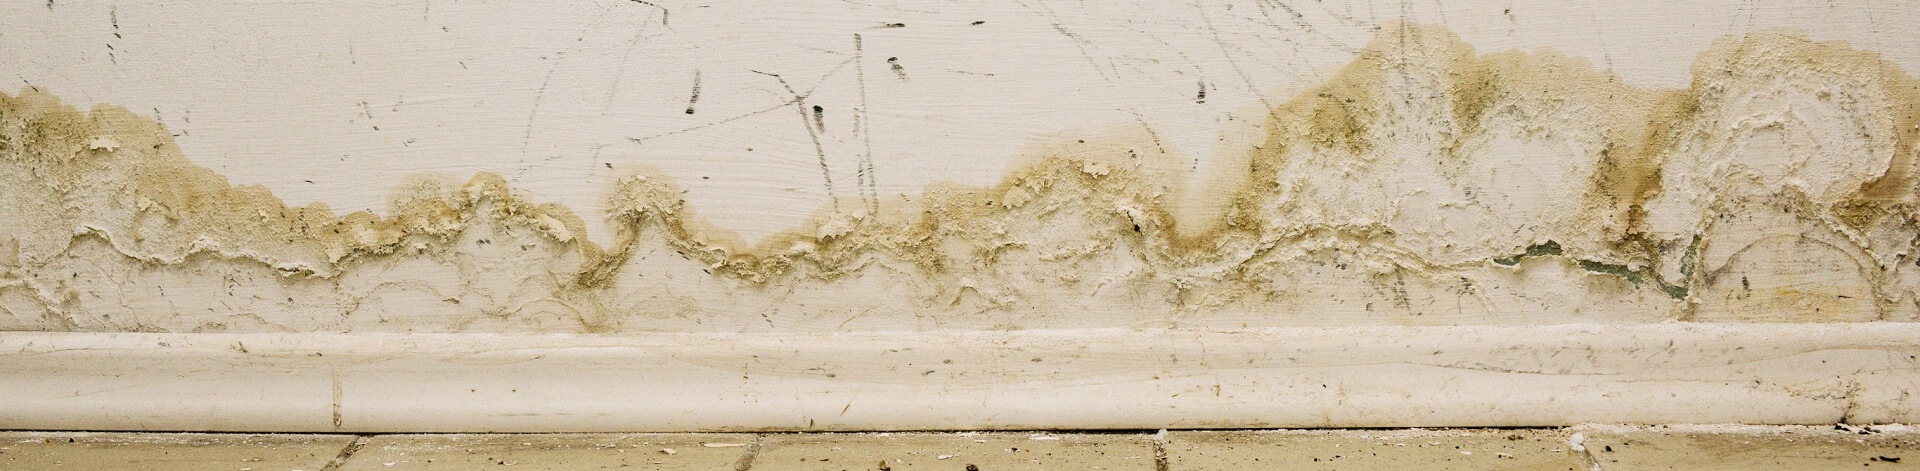 a hendry county public adjuster will help with this mold damage